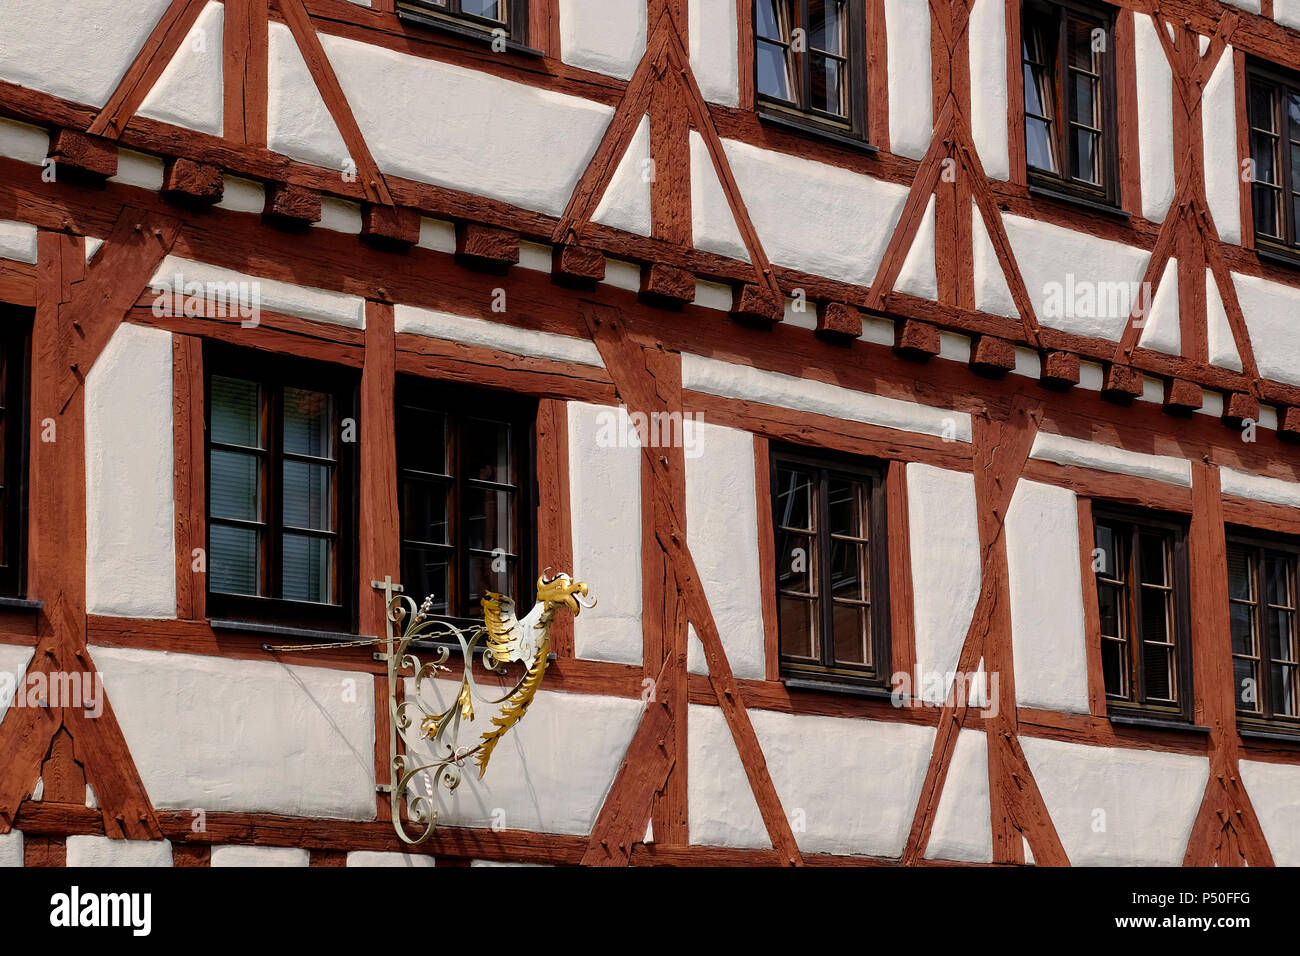 Timbered house in Nuremberg, Germany. Stock Photo